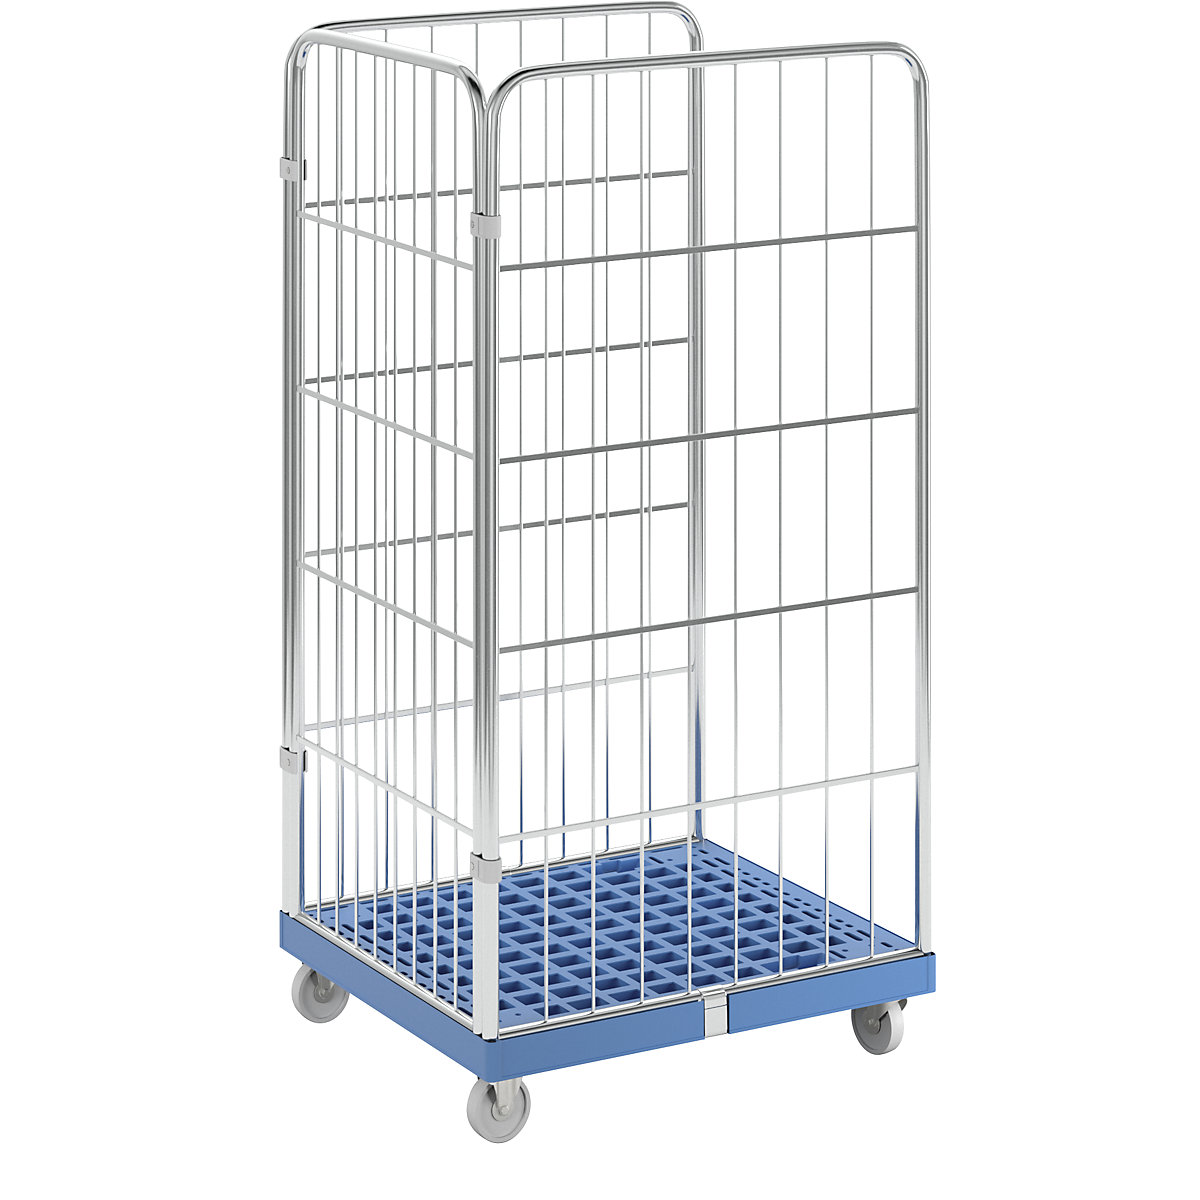 Roll container with mesh panels, plastic transport dolly, 3-sided, blue zinc plated mesh, with inclined shelf support-2